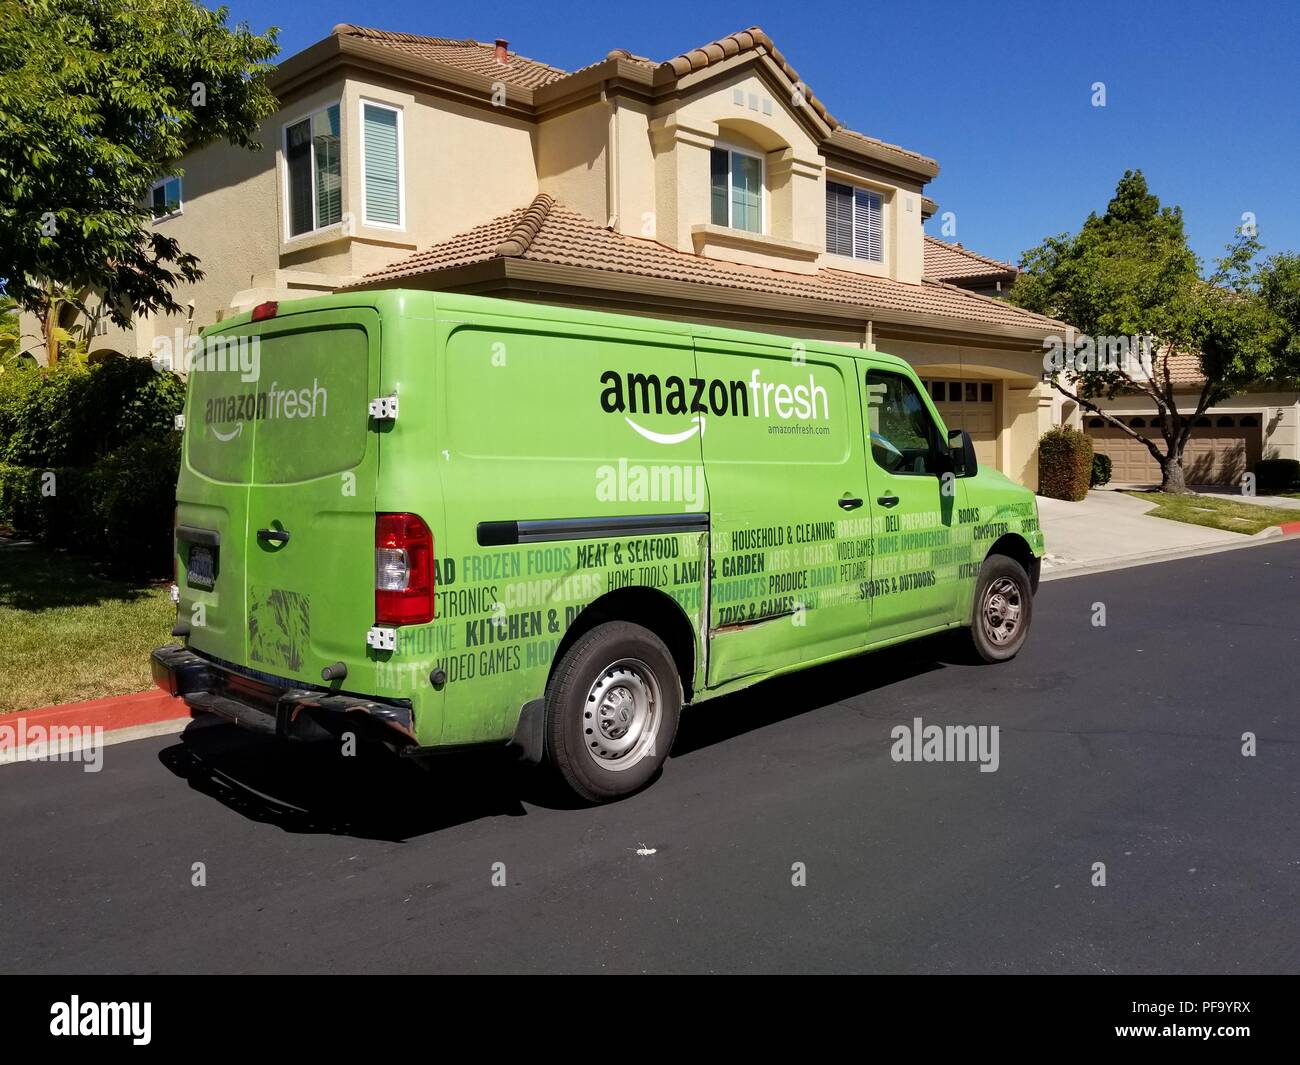 Amazon Fresh Grocery Delivery Truck From The Amazon Prime Service Parked On A Suburban Street In San Ramon California July 5 18 Stock Photo Alamy